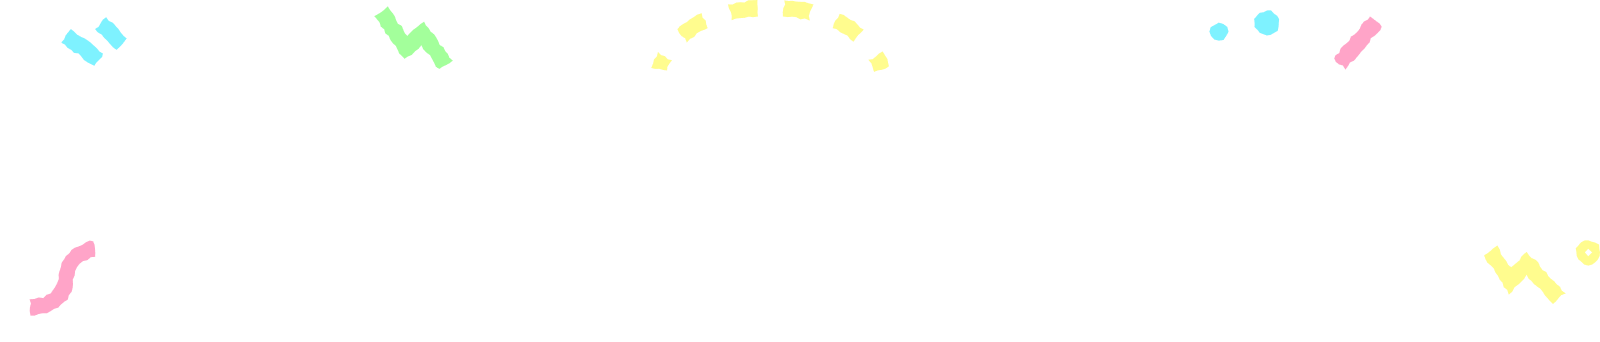 Whimsy & Wonder: A Cozy Games Collection